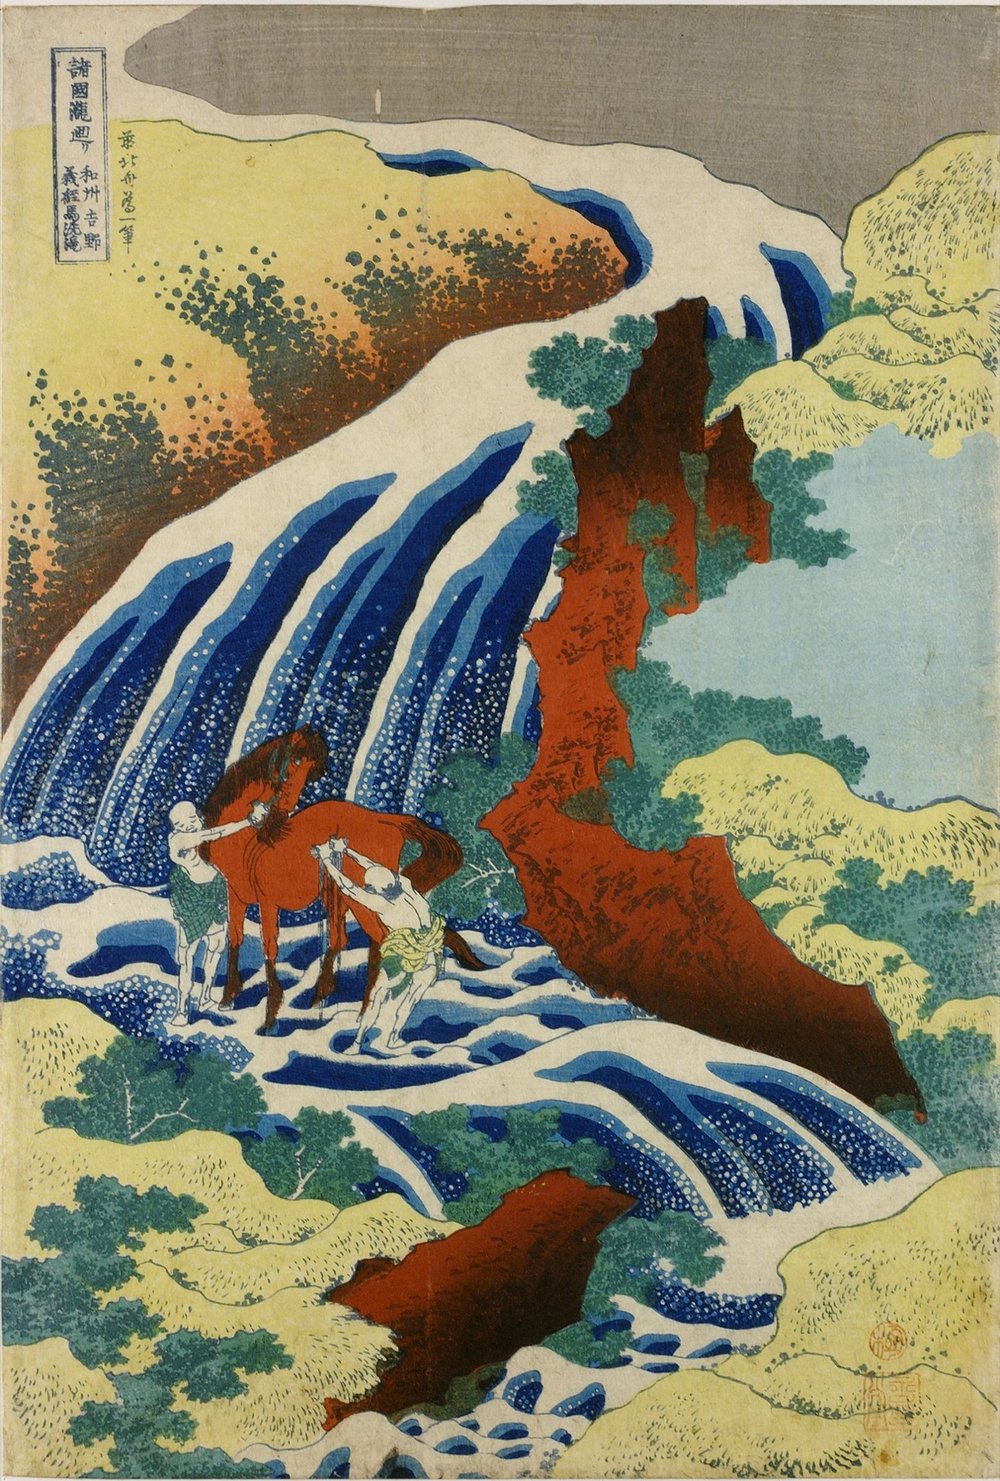 "The waterfall where Yoshitsune washed his horse in Yoshino, Yamato Province, from the series Tour of Waterfalls in Various Provinces"